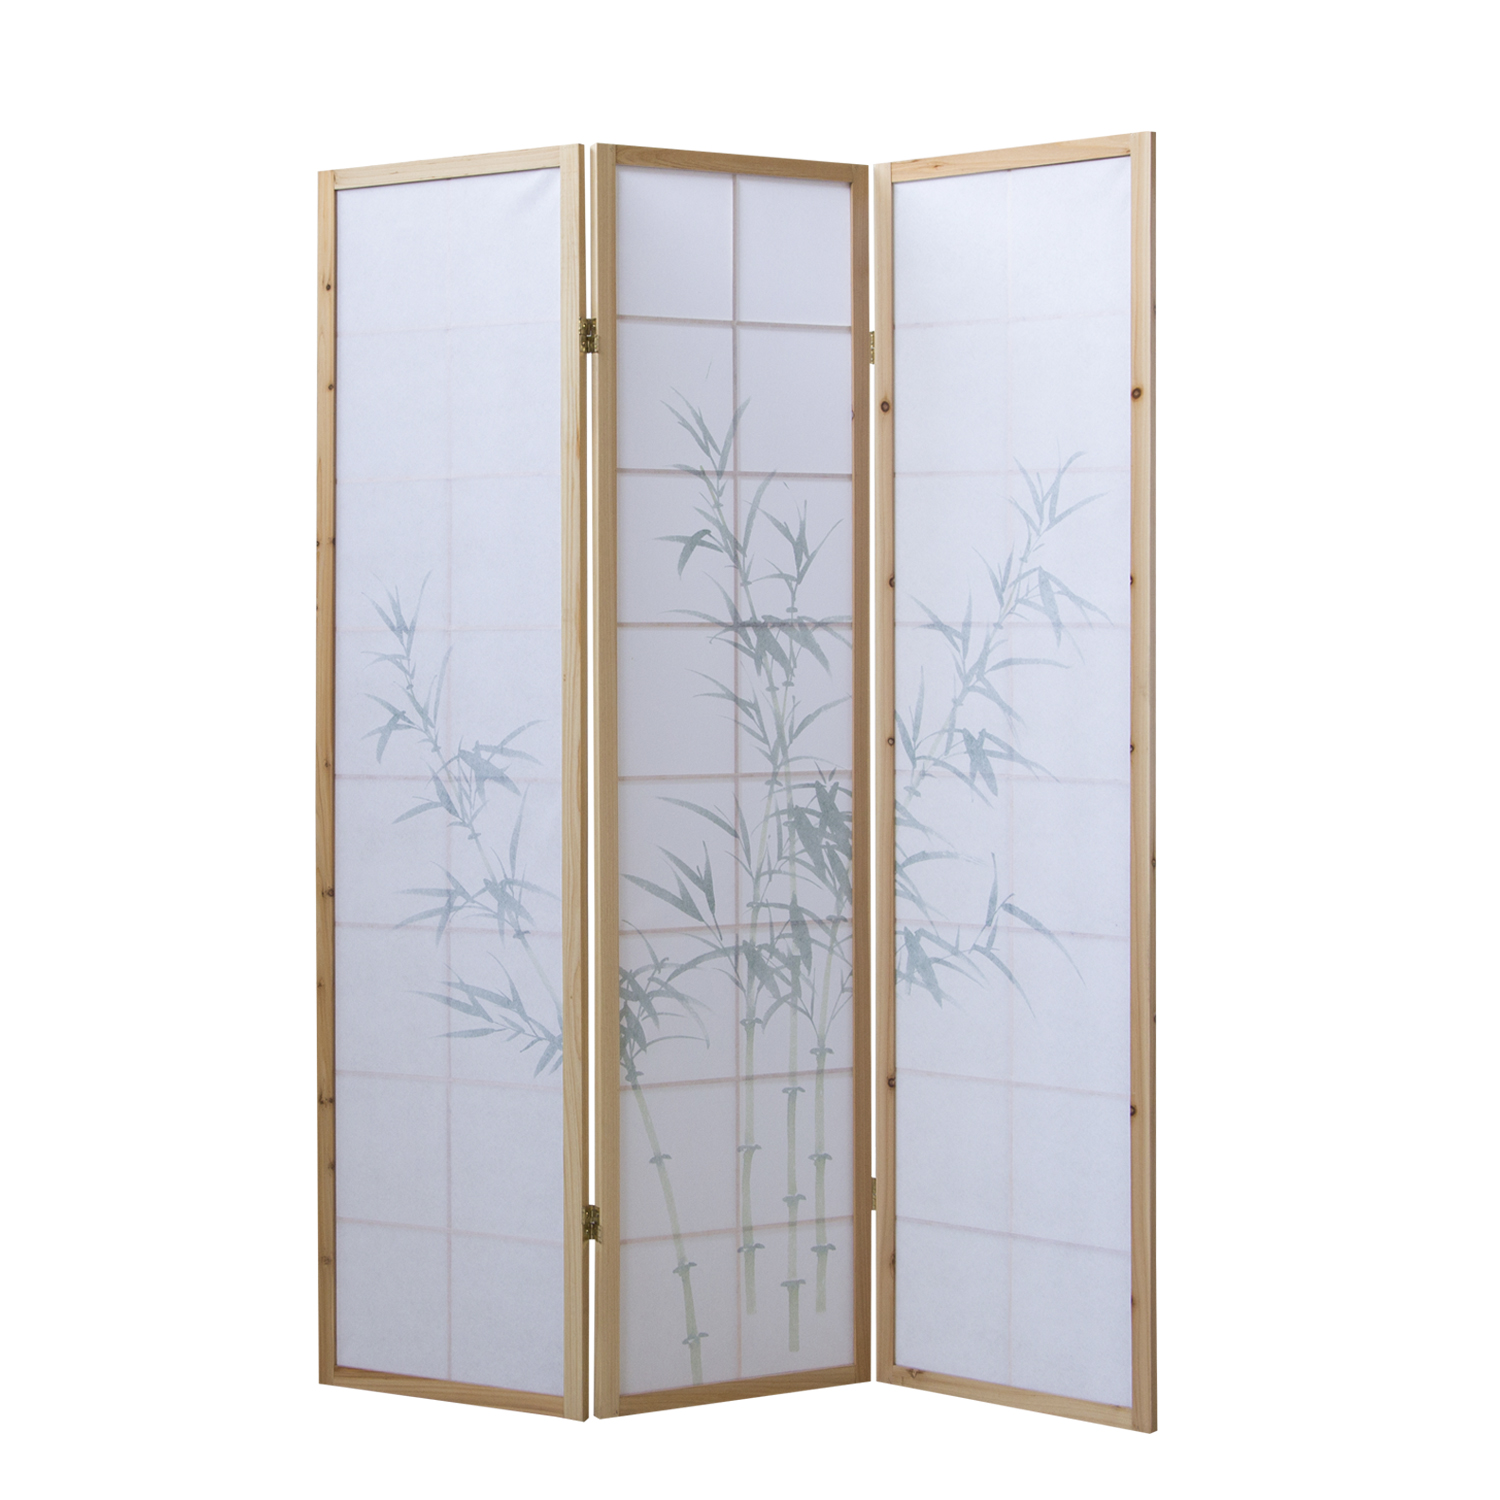 Paravent room divider 3 parts, wood natural, rice paper white, bamboo pattern, height 175 cm	